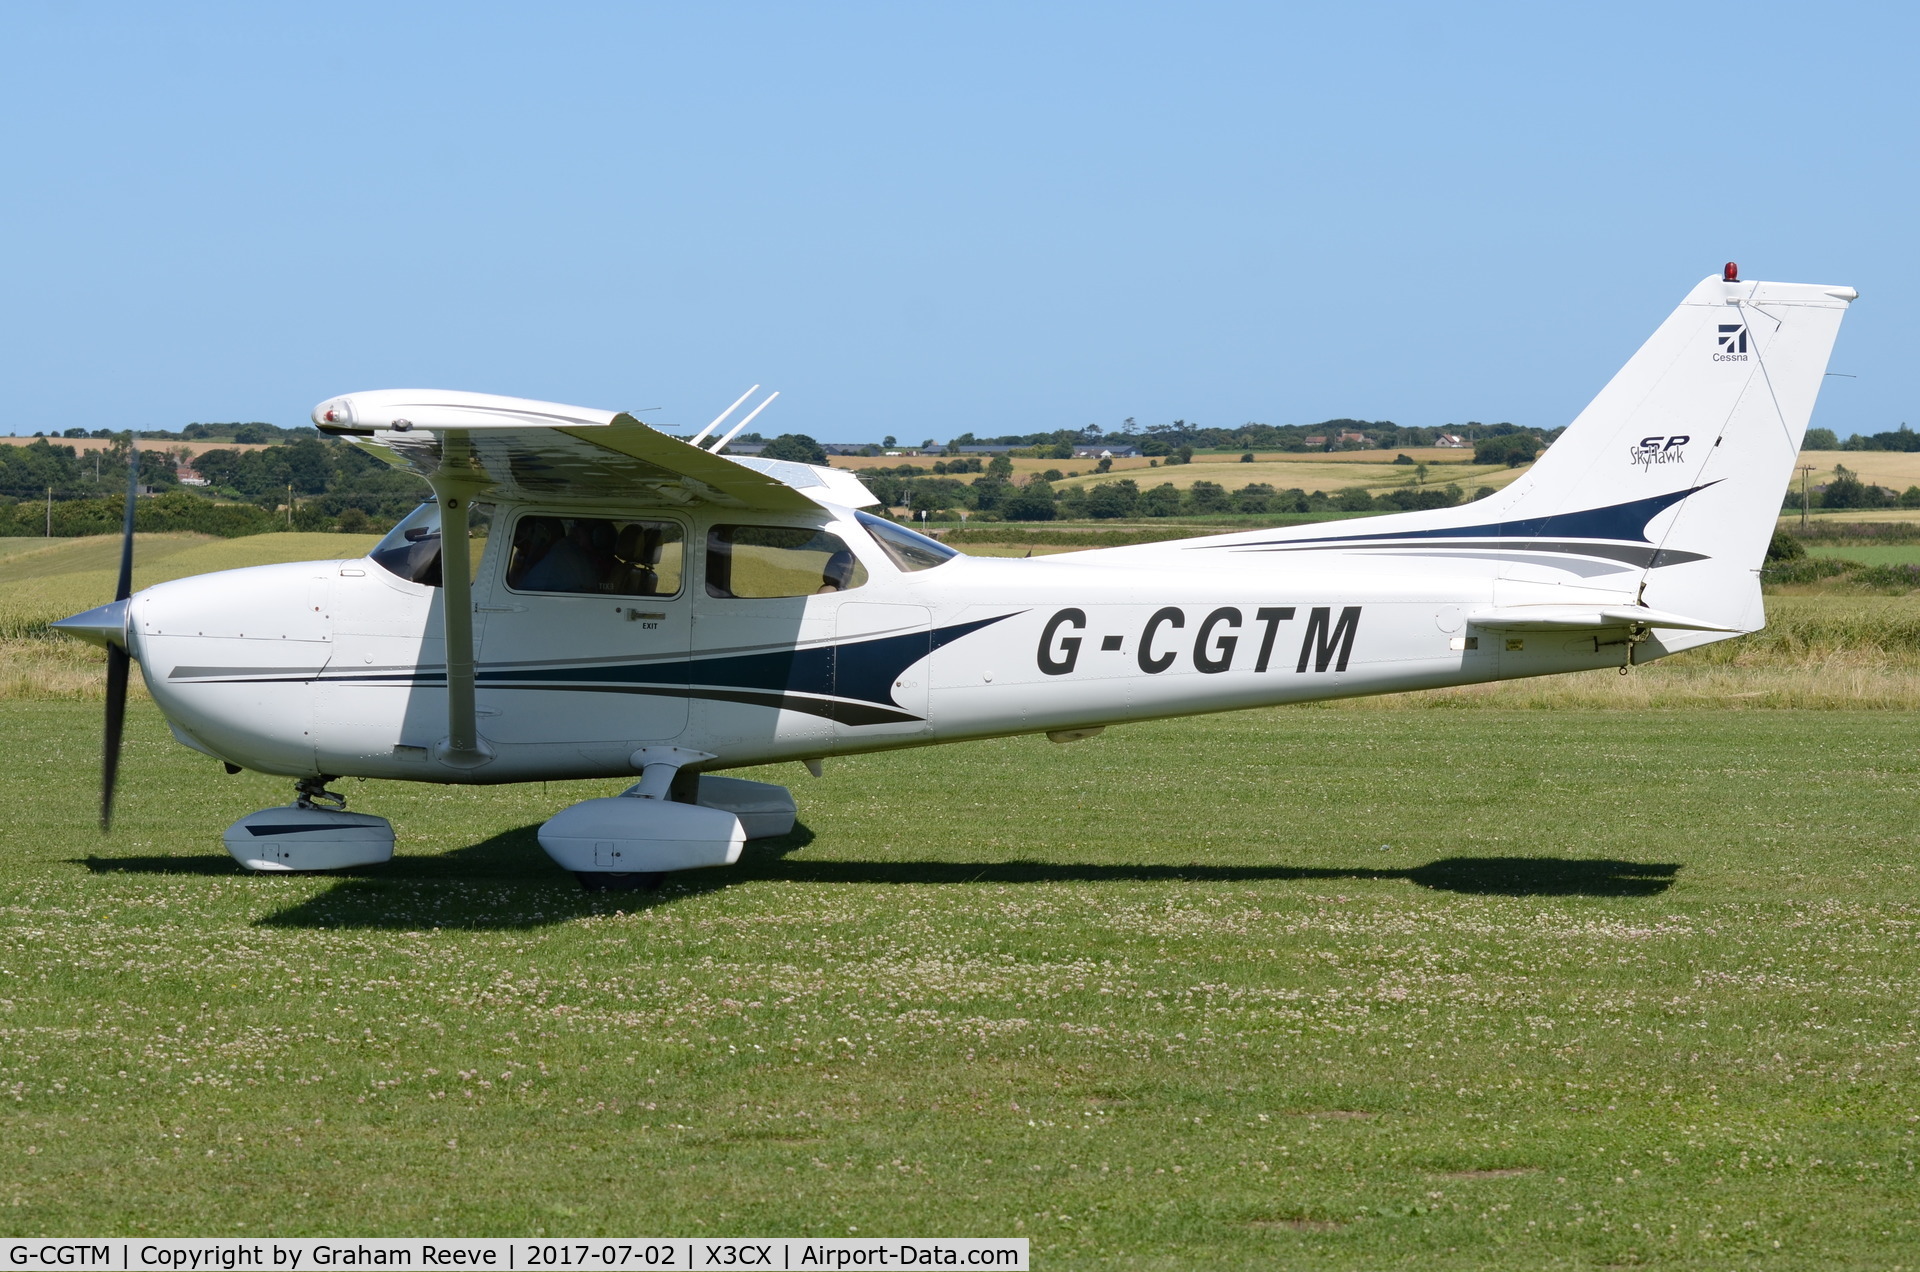 G-CGTM, 2004 Cessna 172S Skyhawk SP C/N 172S9597, Just landed at Northrepps.